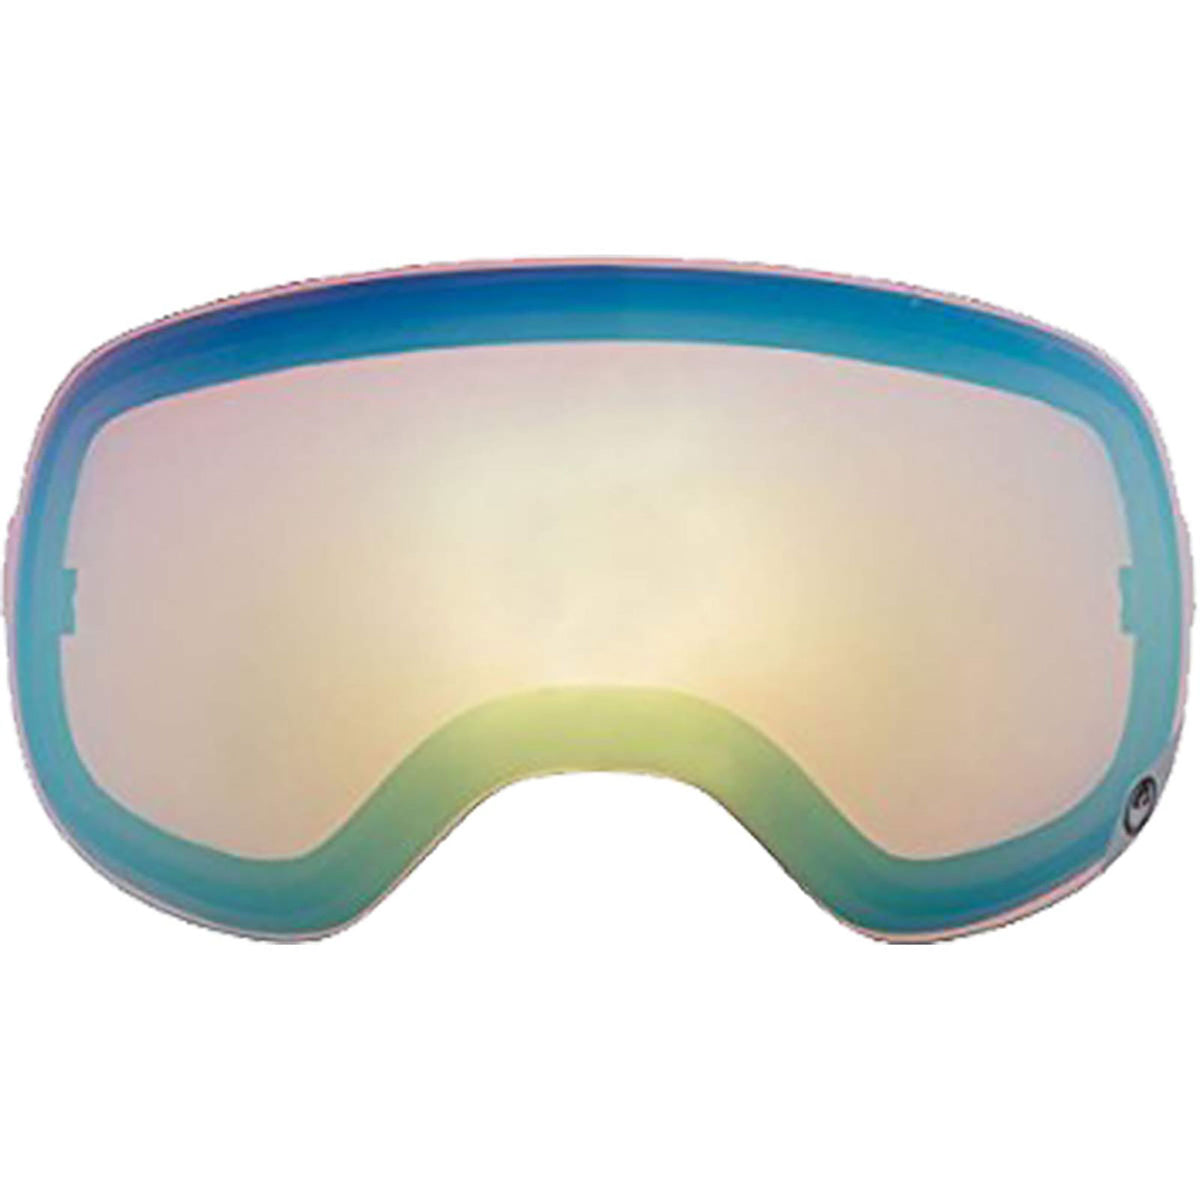 Dragon Alliance X1S Replacement Lens Goggle Accessories-722-1182